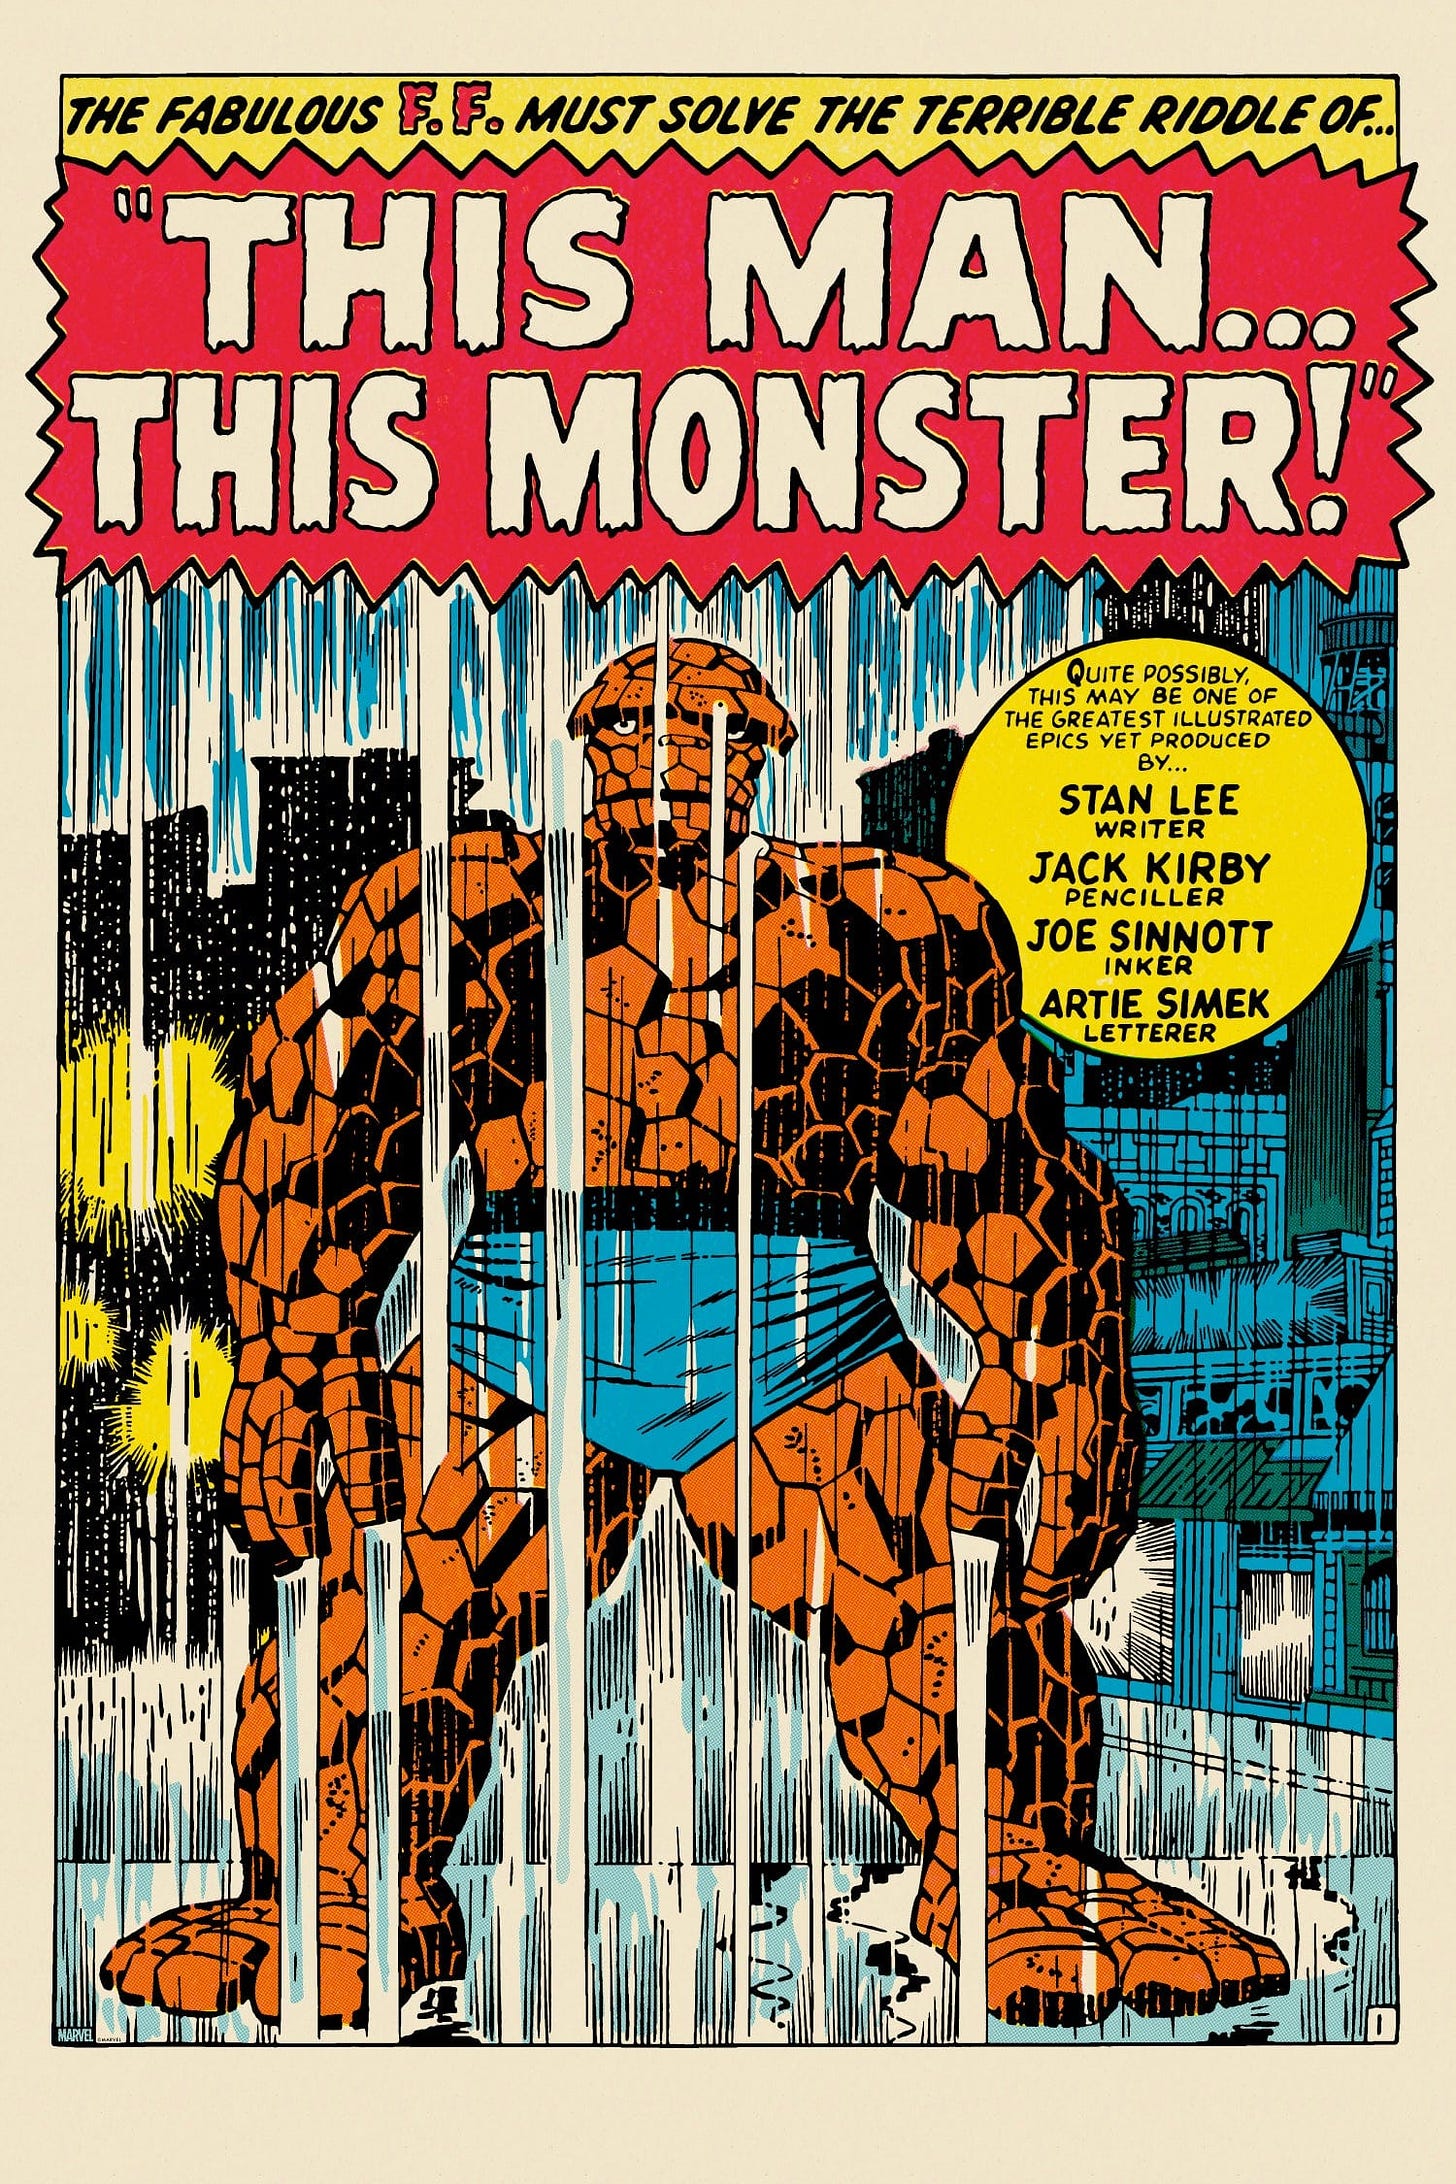 Fantastic Four #51: “This Man… This Monster!” Poster – Mondo